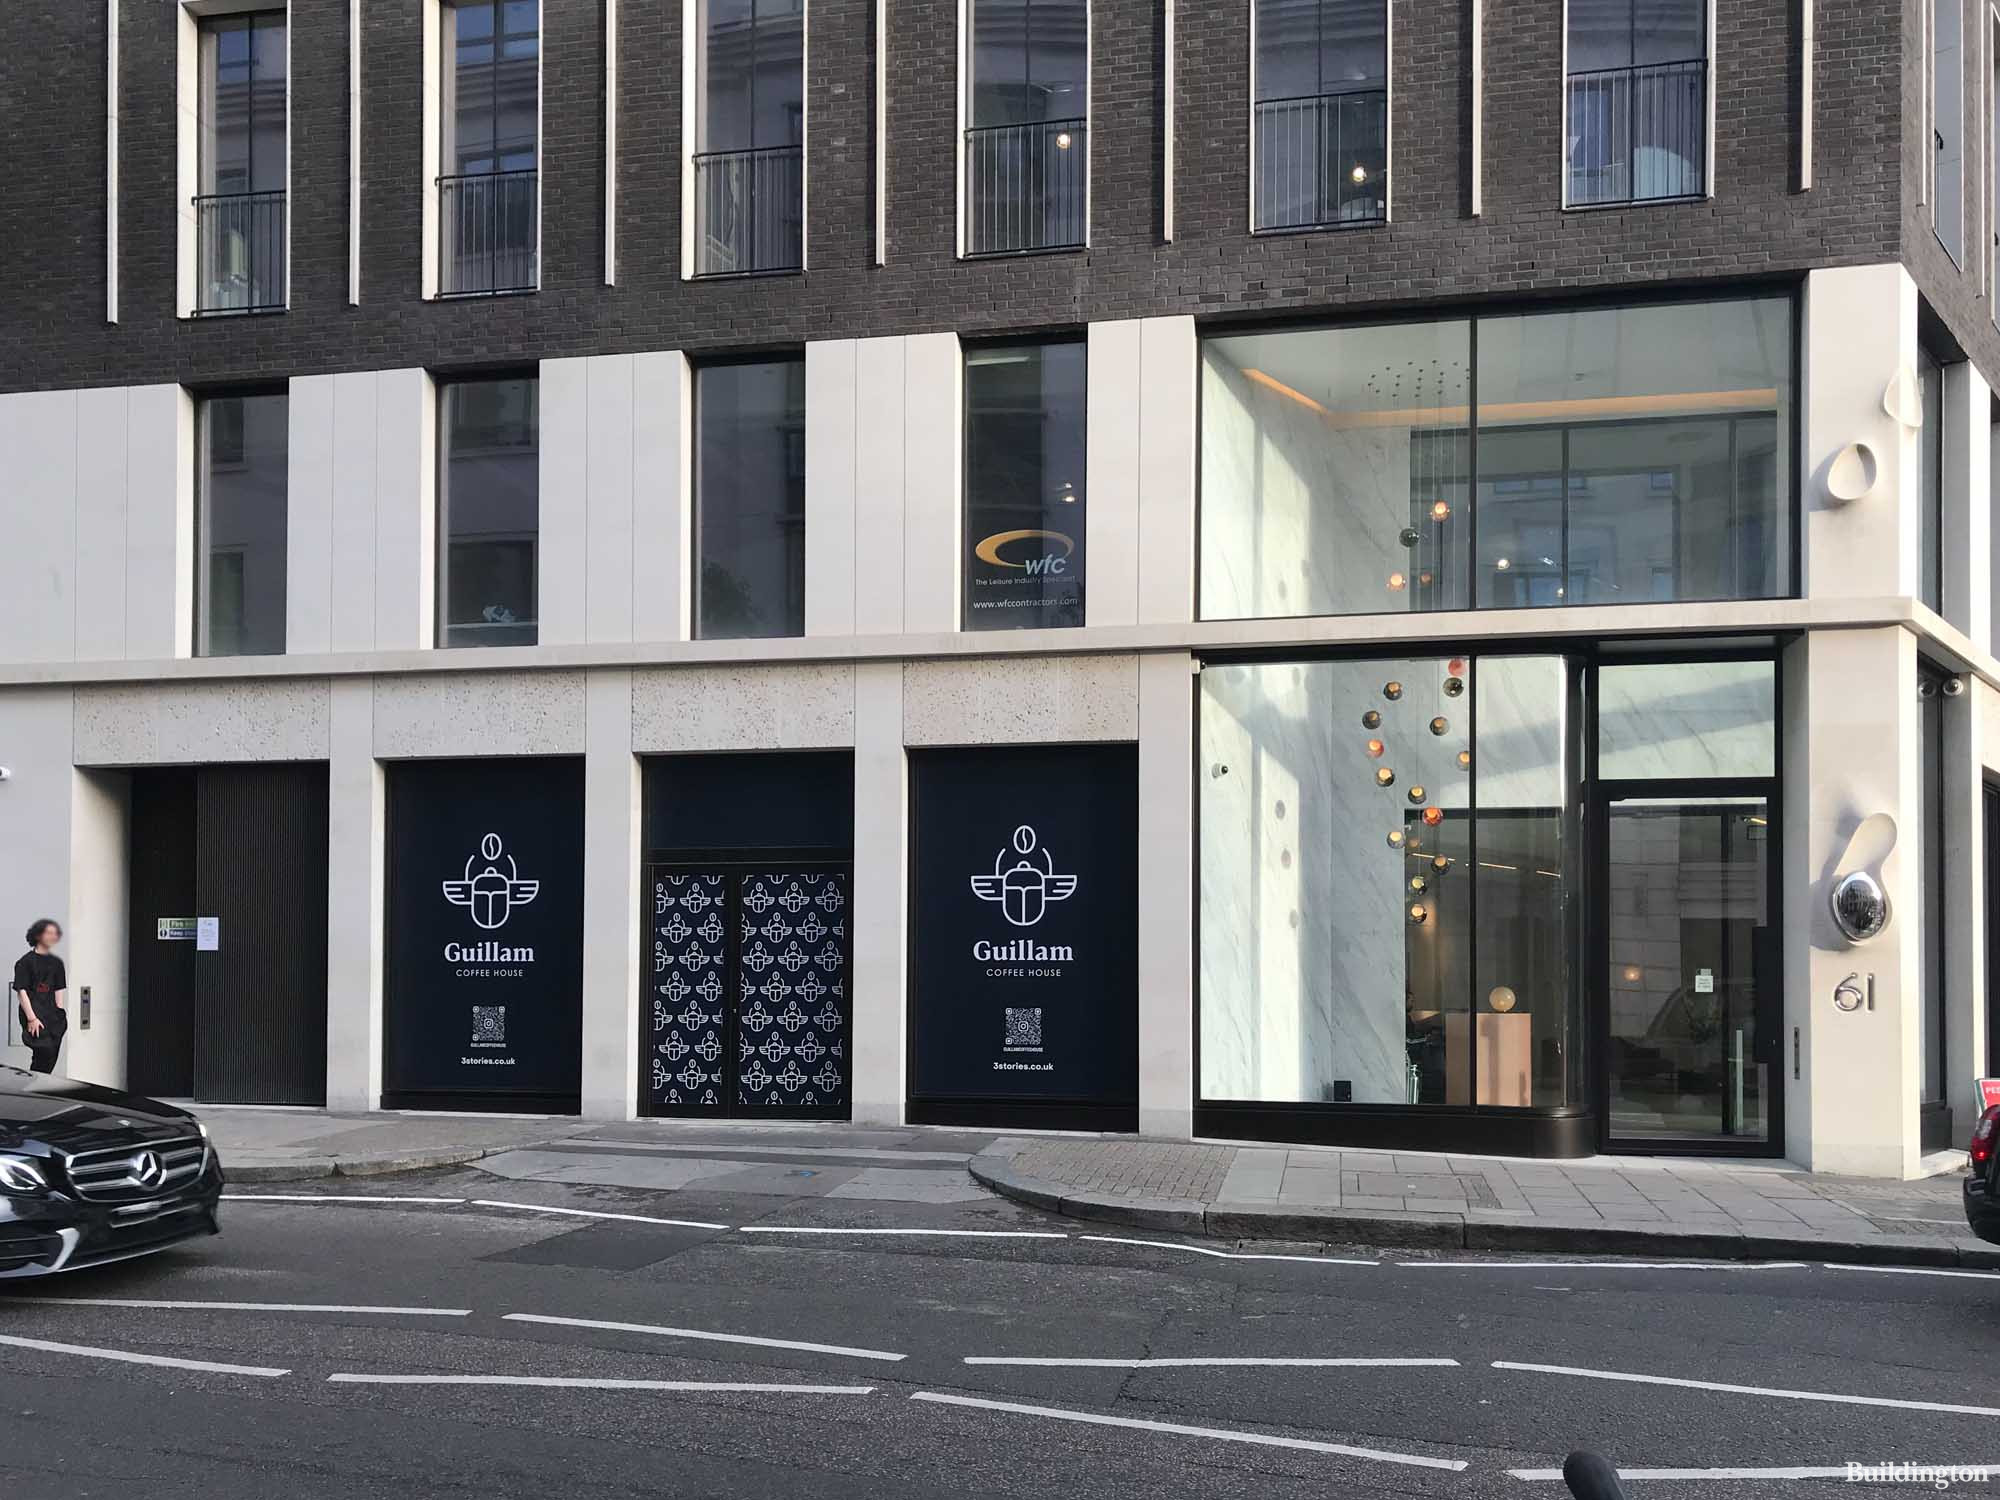 Guillam Coffee House opening soon at 61 Curzon Street in Mayfair, London W1.